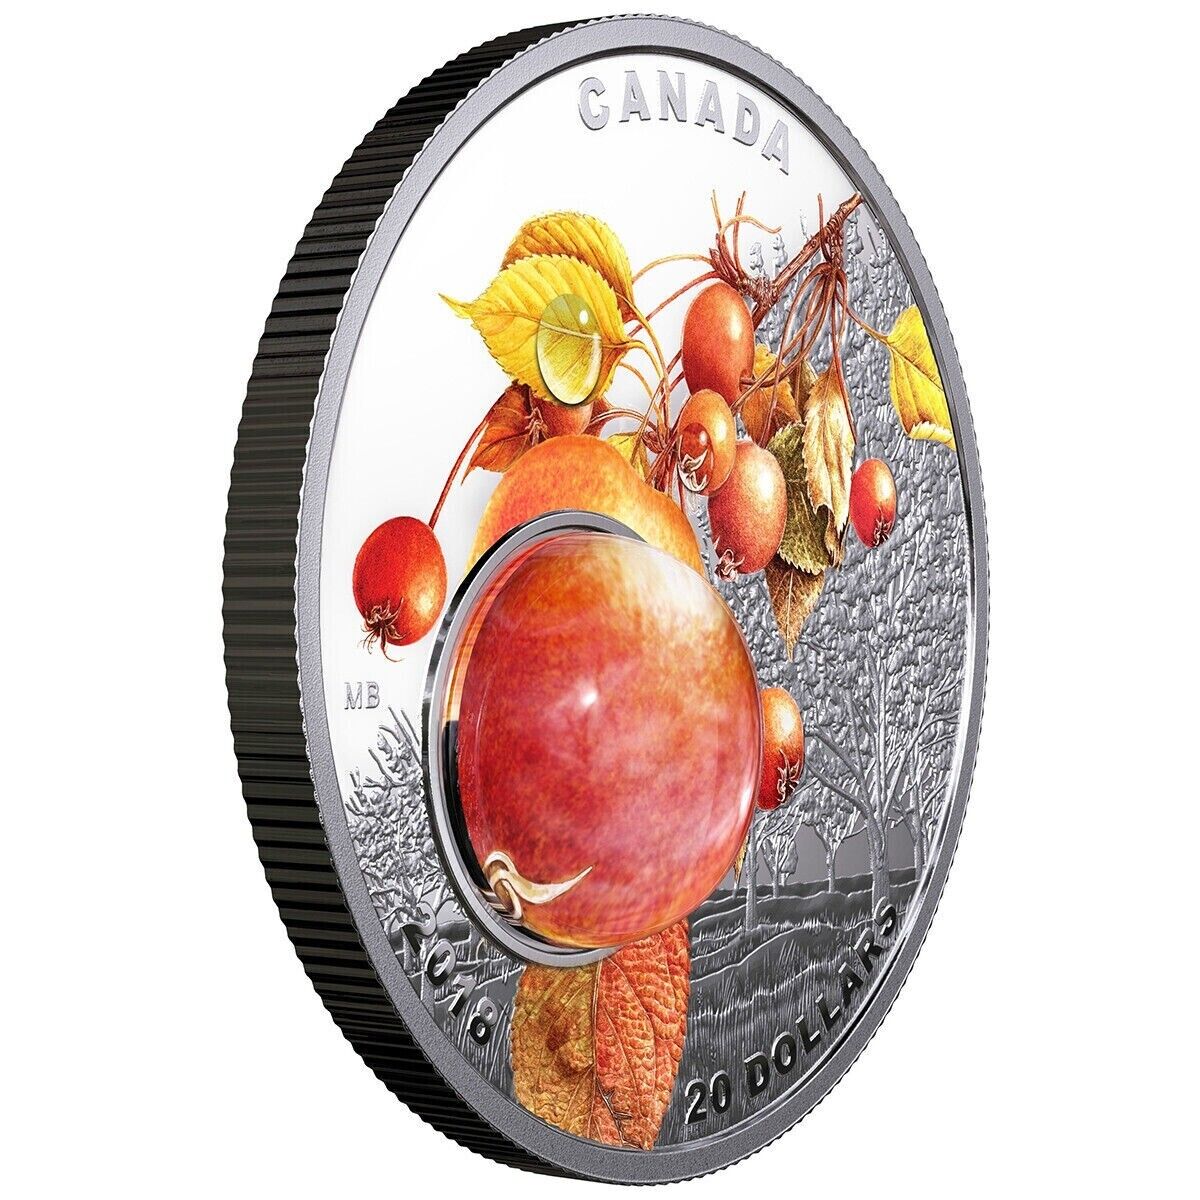 1 oz Silver Coin 2018 Canada $20 Mother Natures Magnification: Morning Dew-classypw.com-1